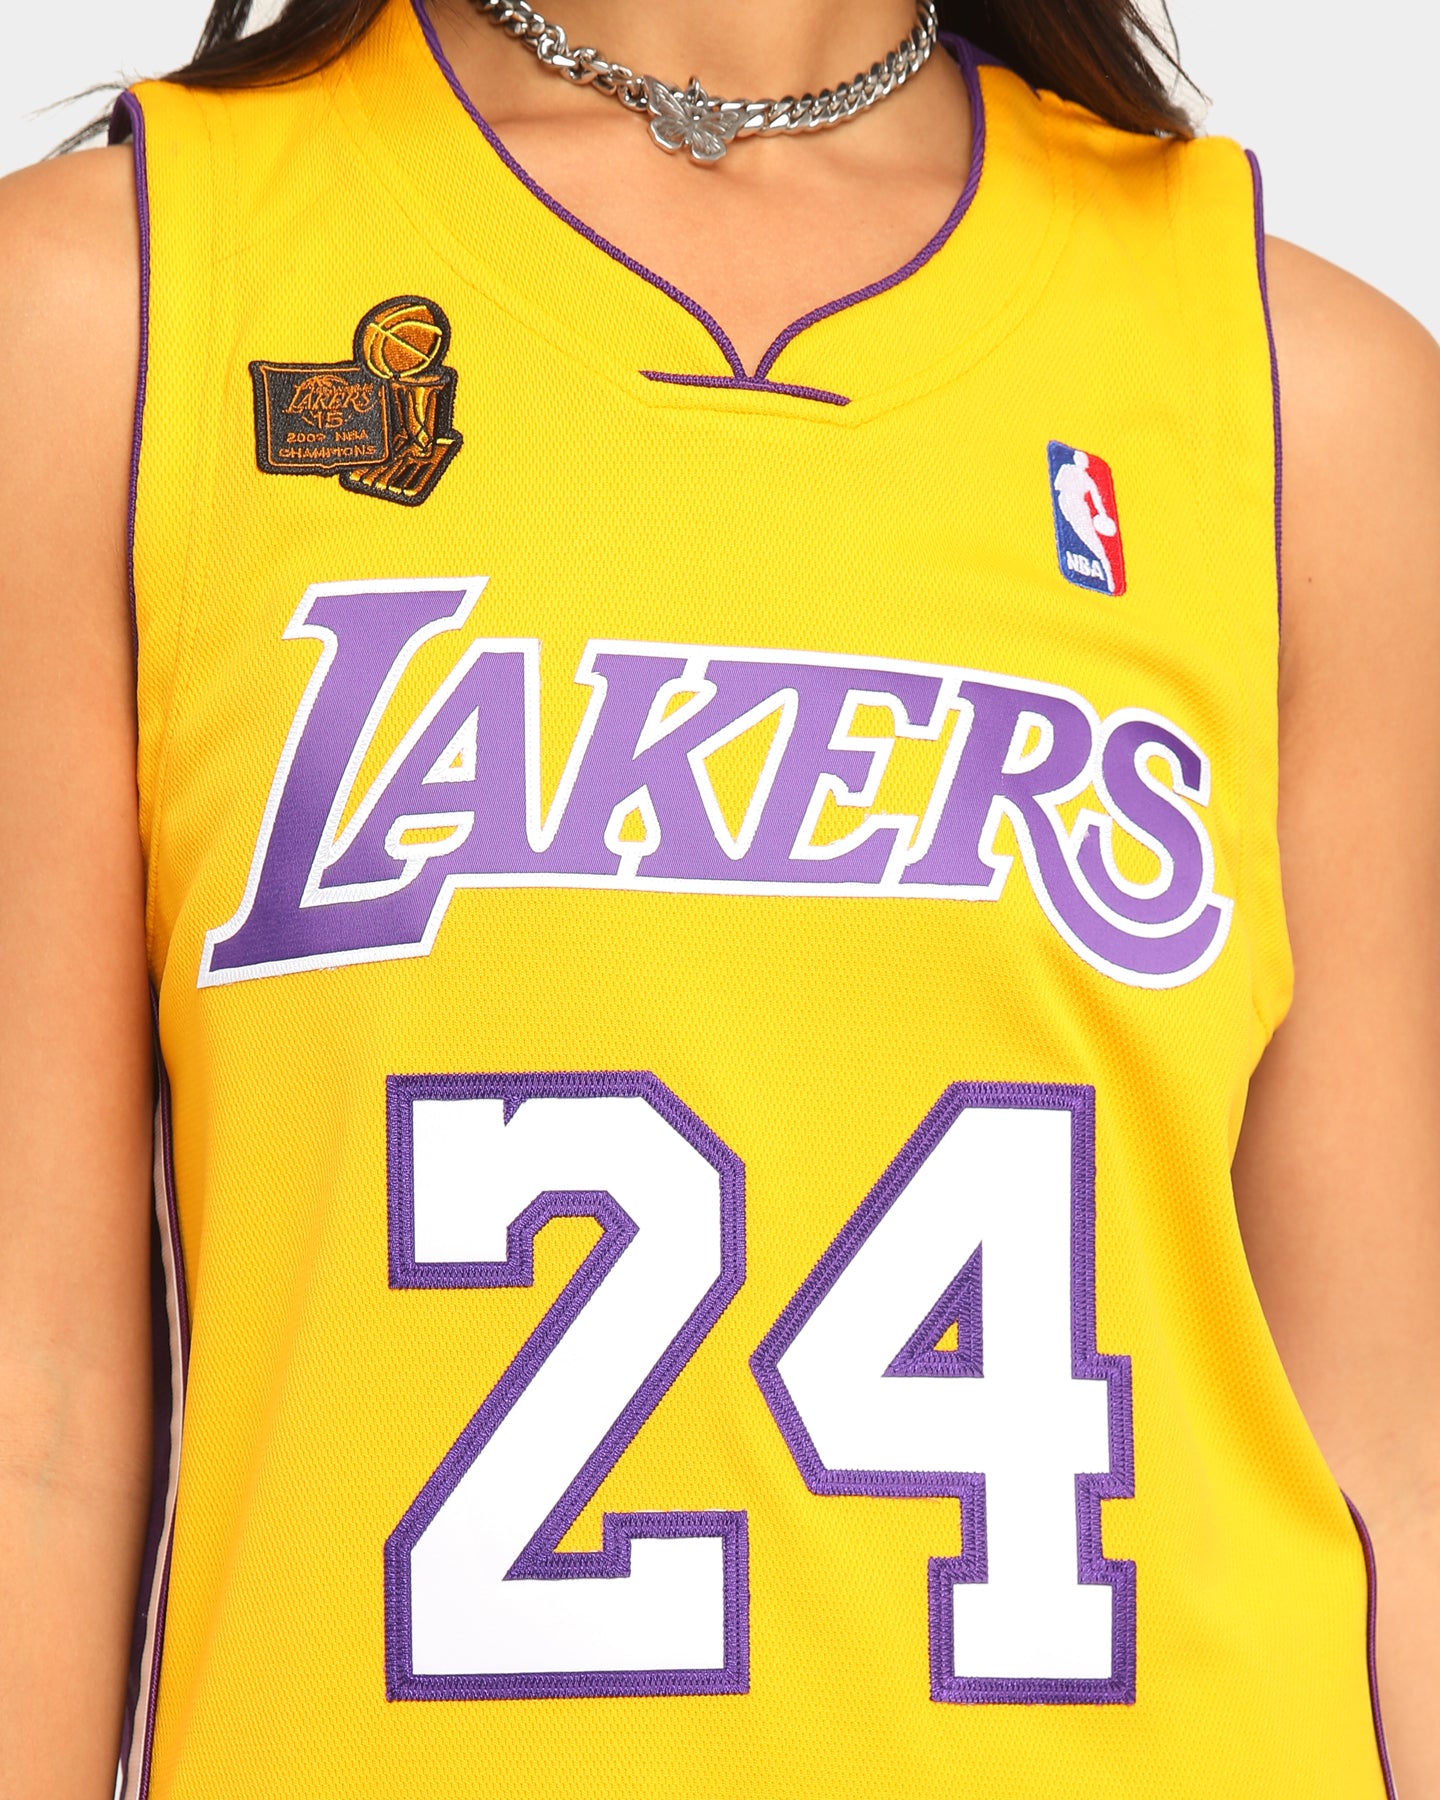 2009 lakers jersey